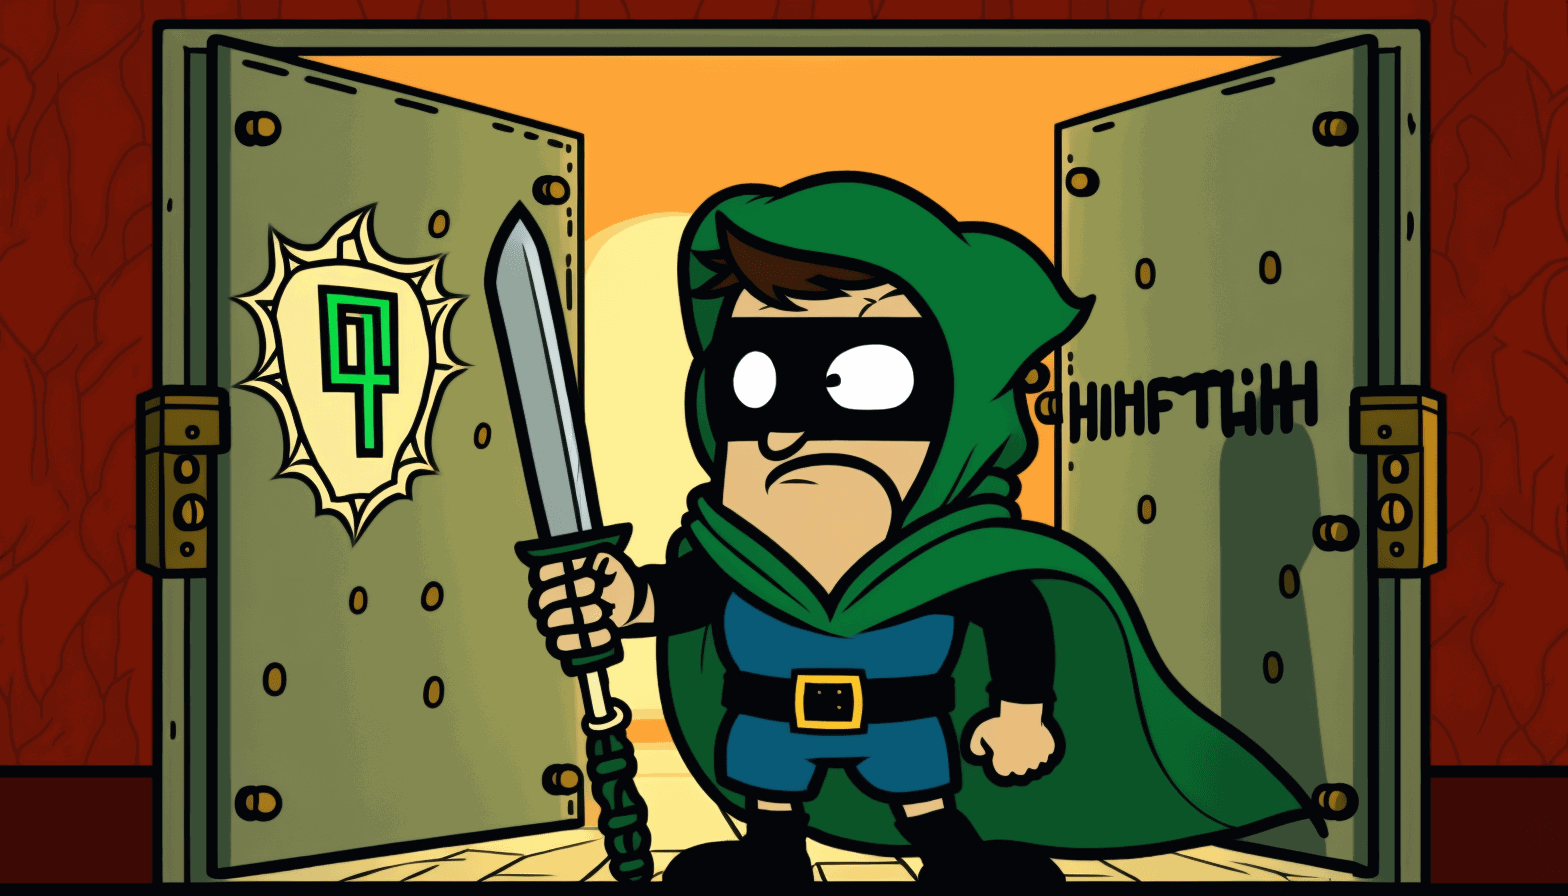 A cartoon hacker wearing a cape and a mask, standing in front of a vault door with the HTB logo on it and holding a tool (such as a wrench or a screwdriver) with a green background symbolizing success and the flag in a speech bubble above their head.